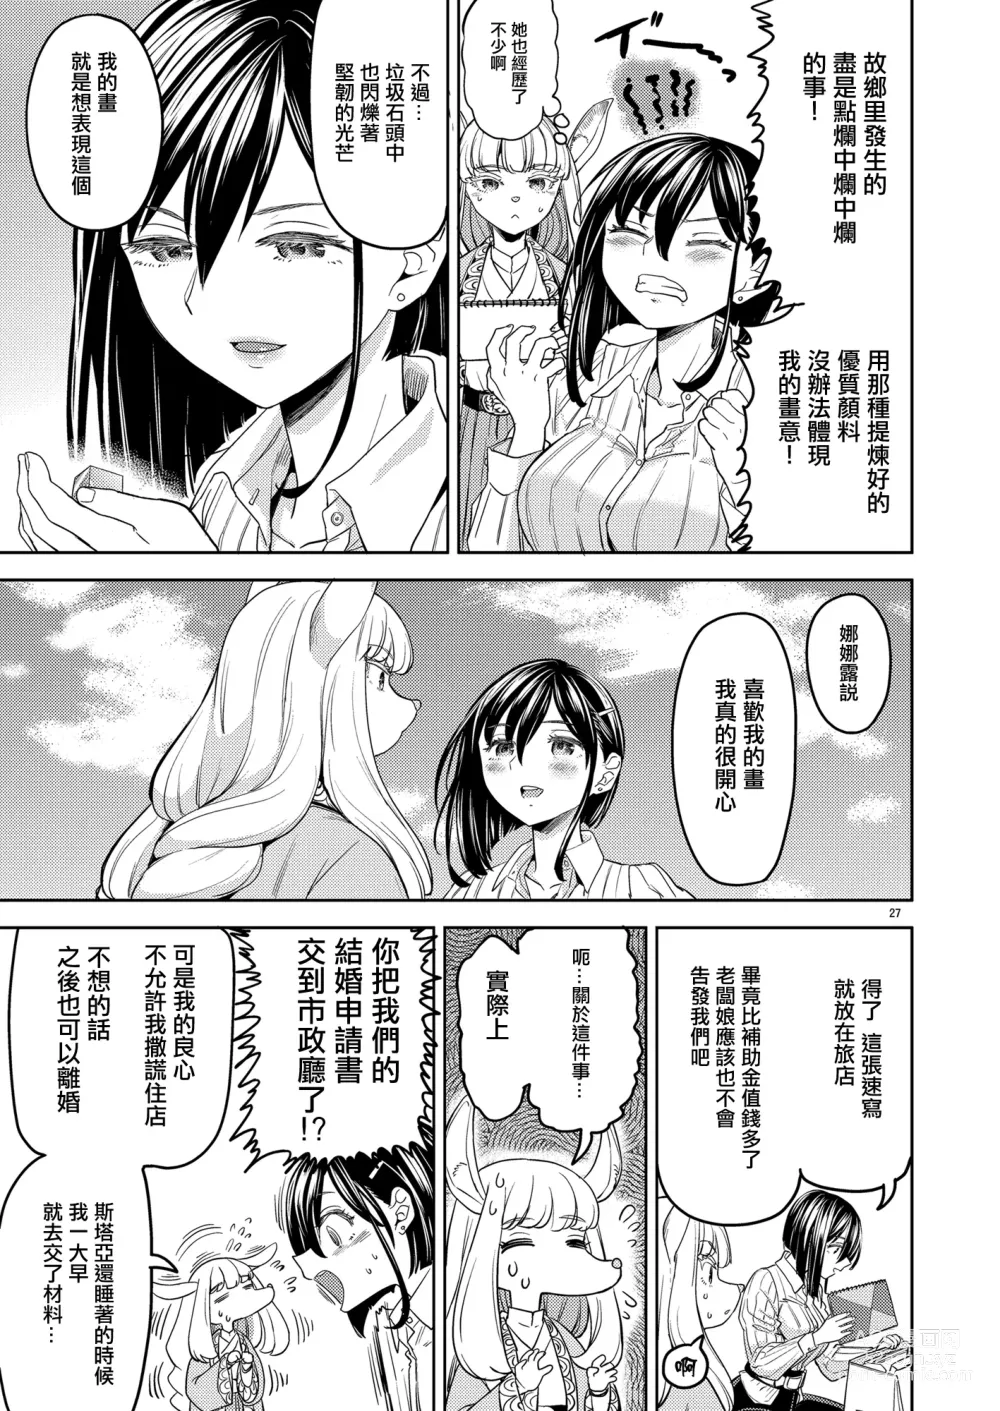 Page 31 of doujinshi 來一場蜜月旅行